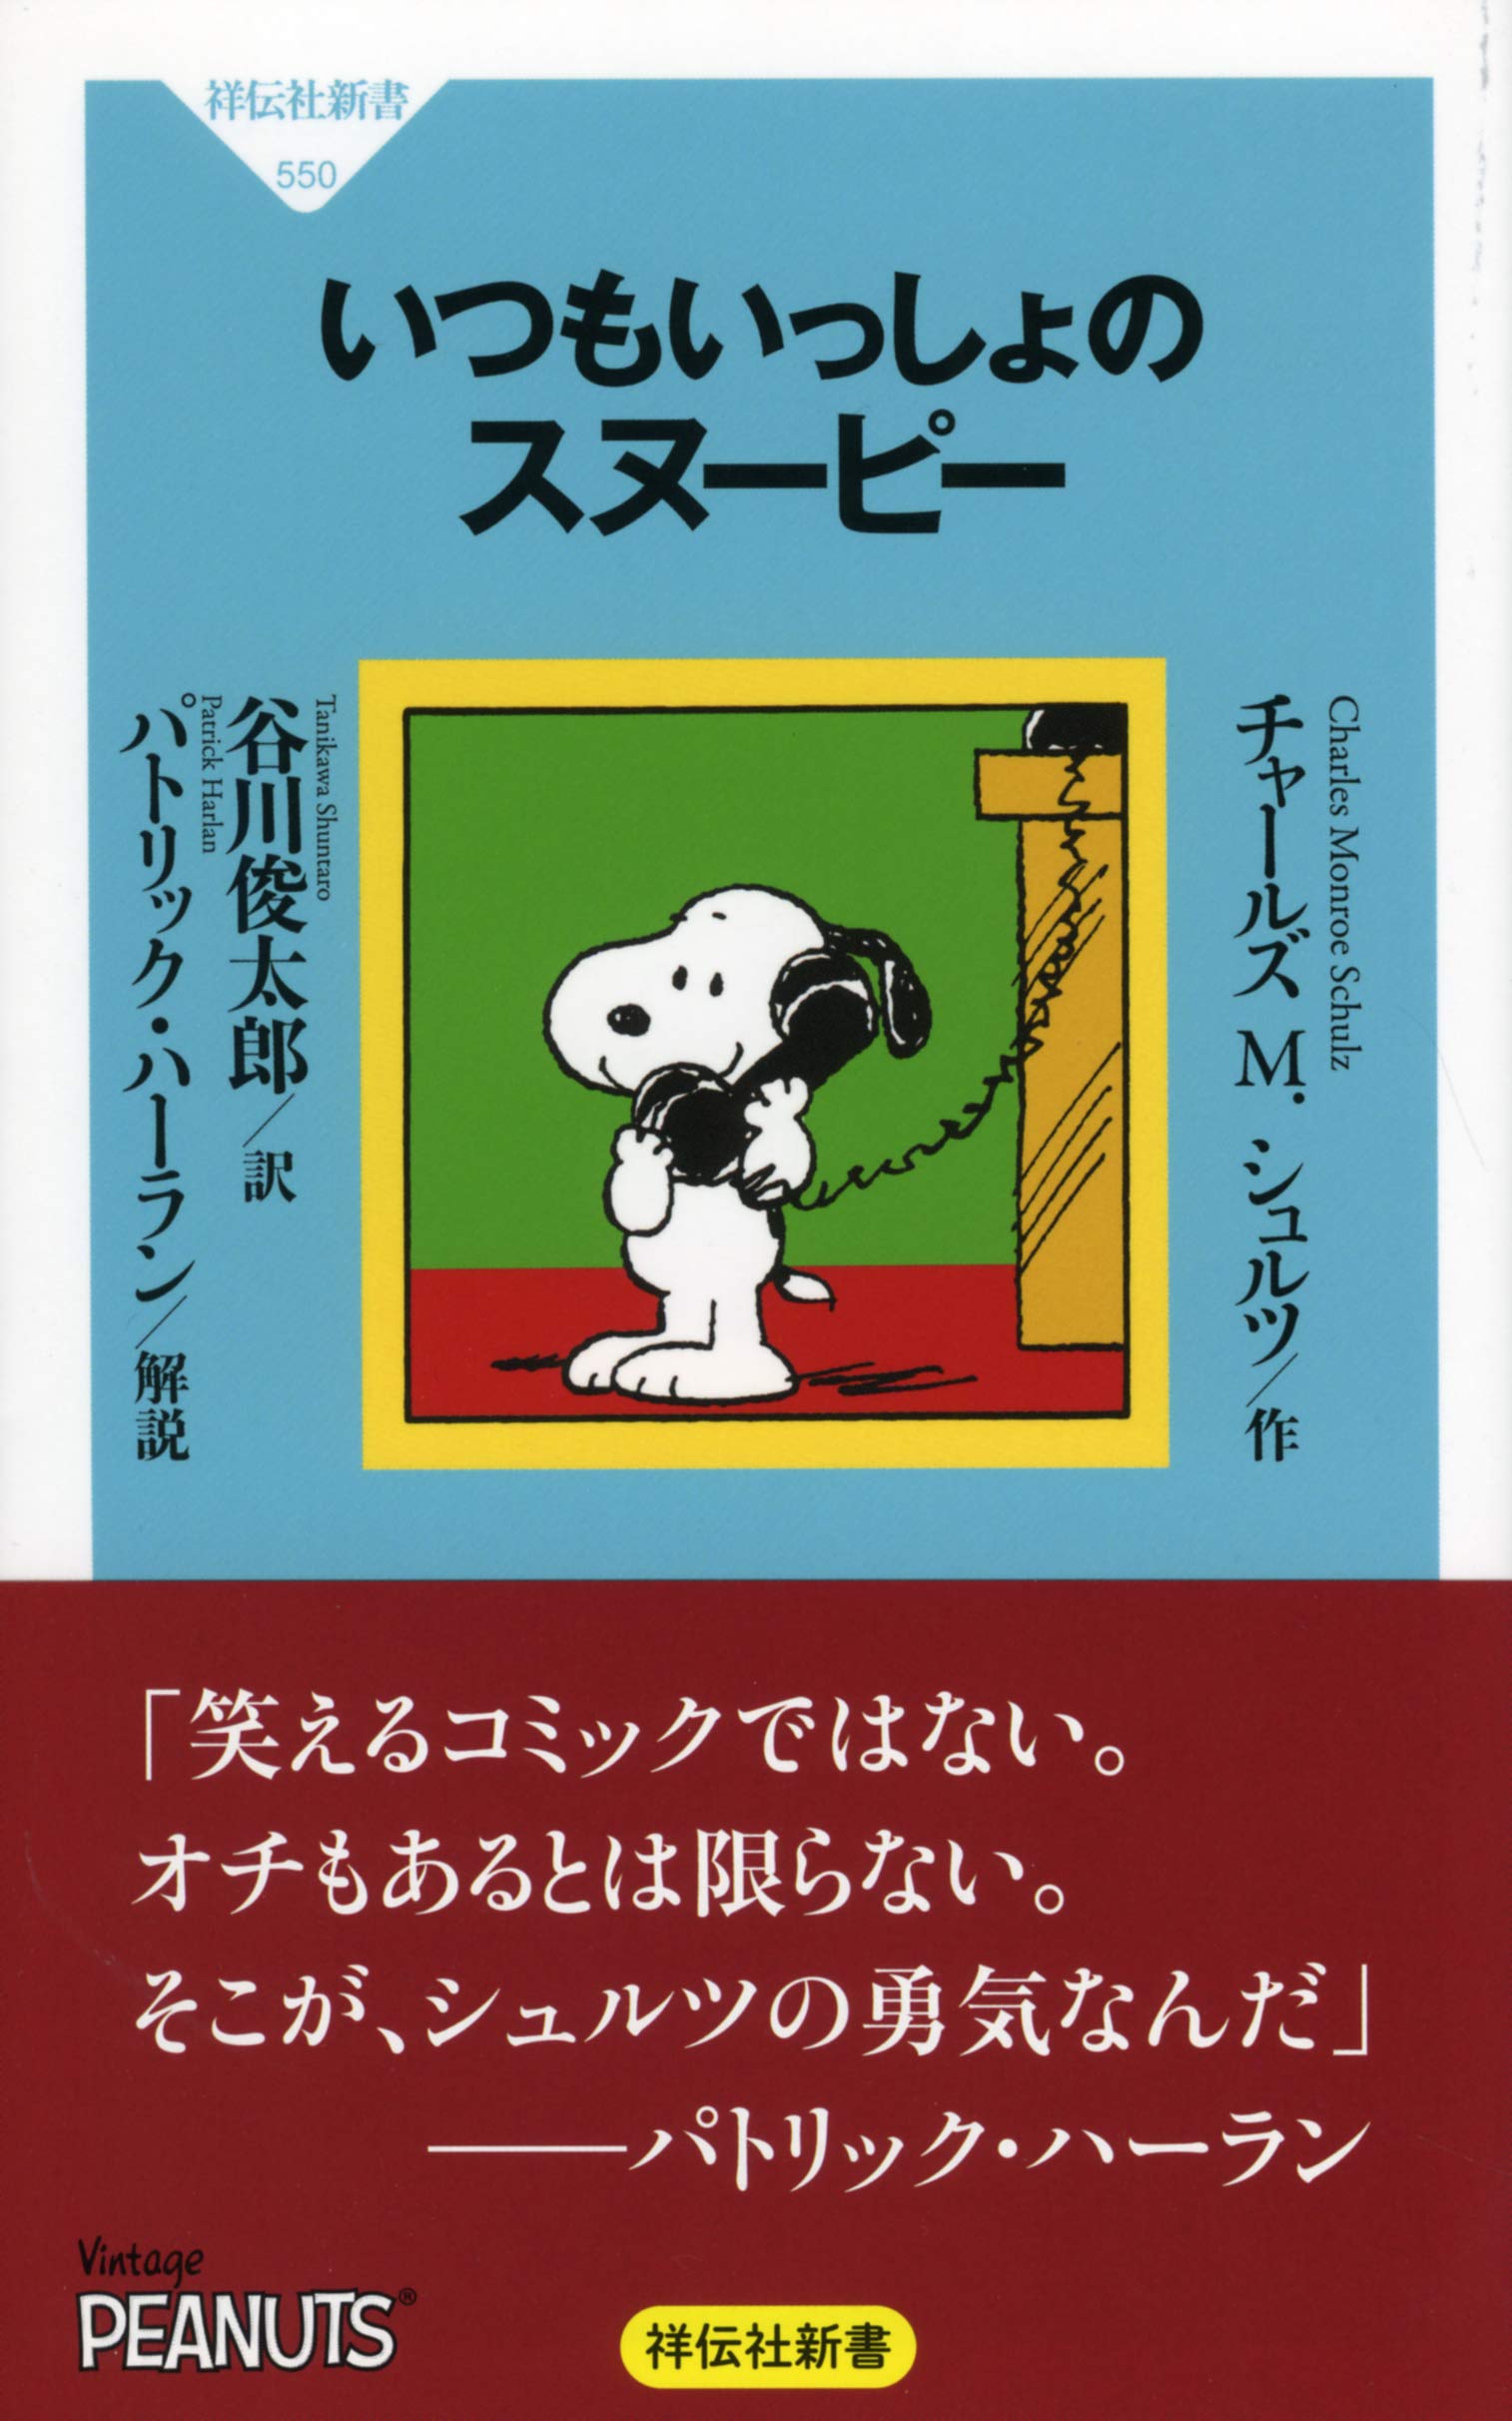 More recent Japanese books The AAUGH Blog